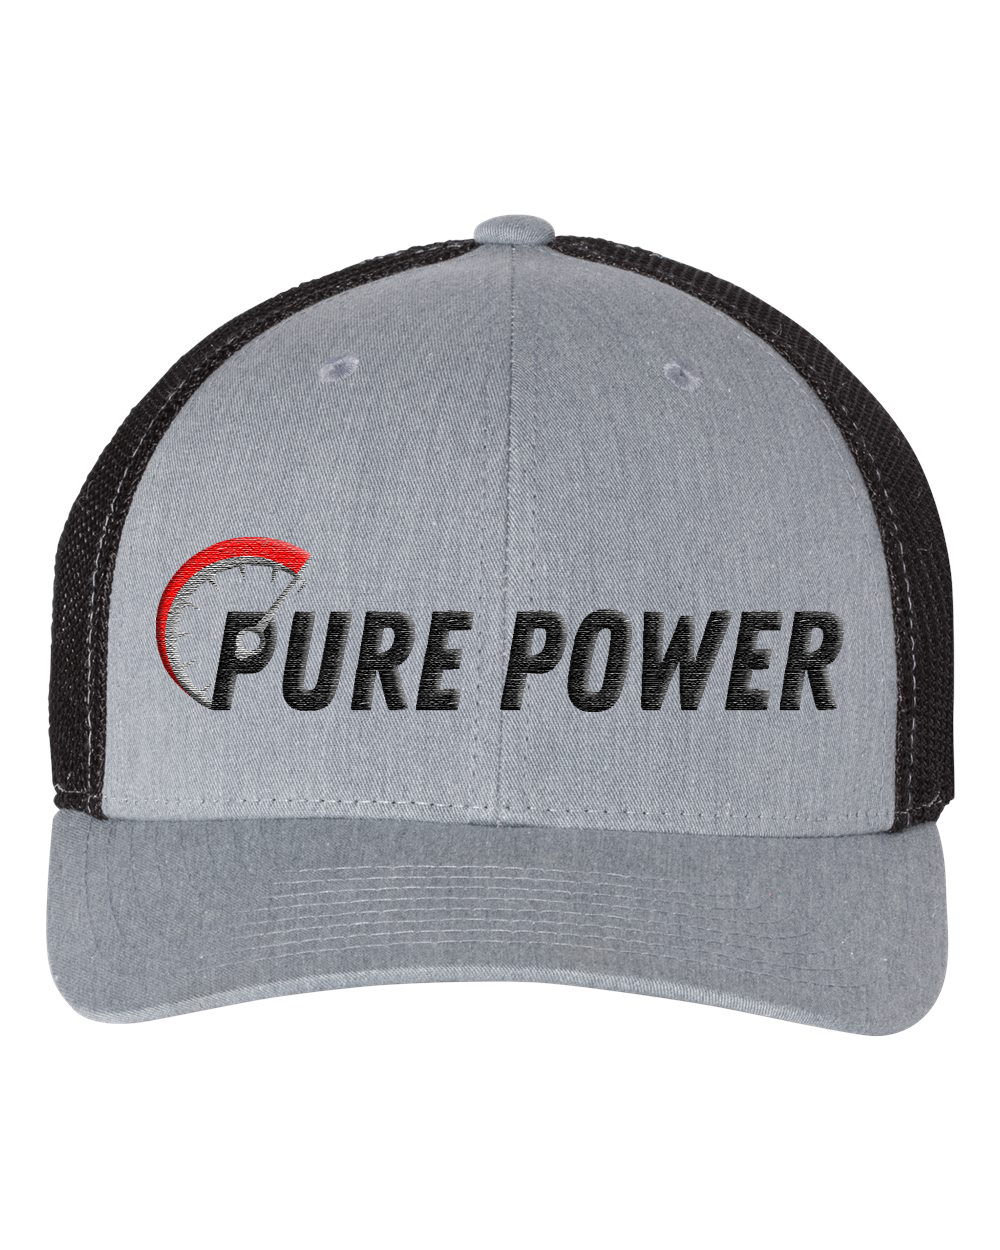 Ride Pure Power Logo Classic Pro 3D Puff Embroidered Snapback Trucker Hat Heather Gray/Black